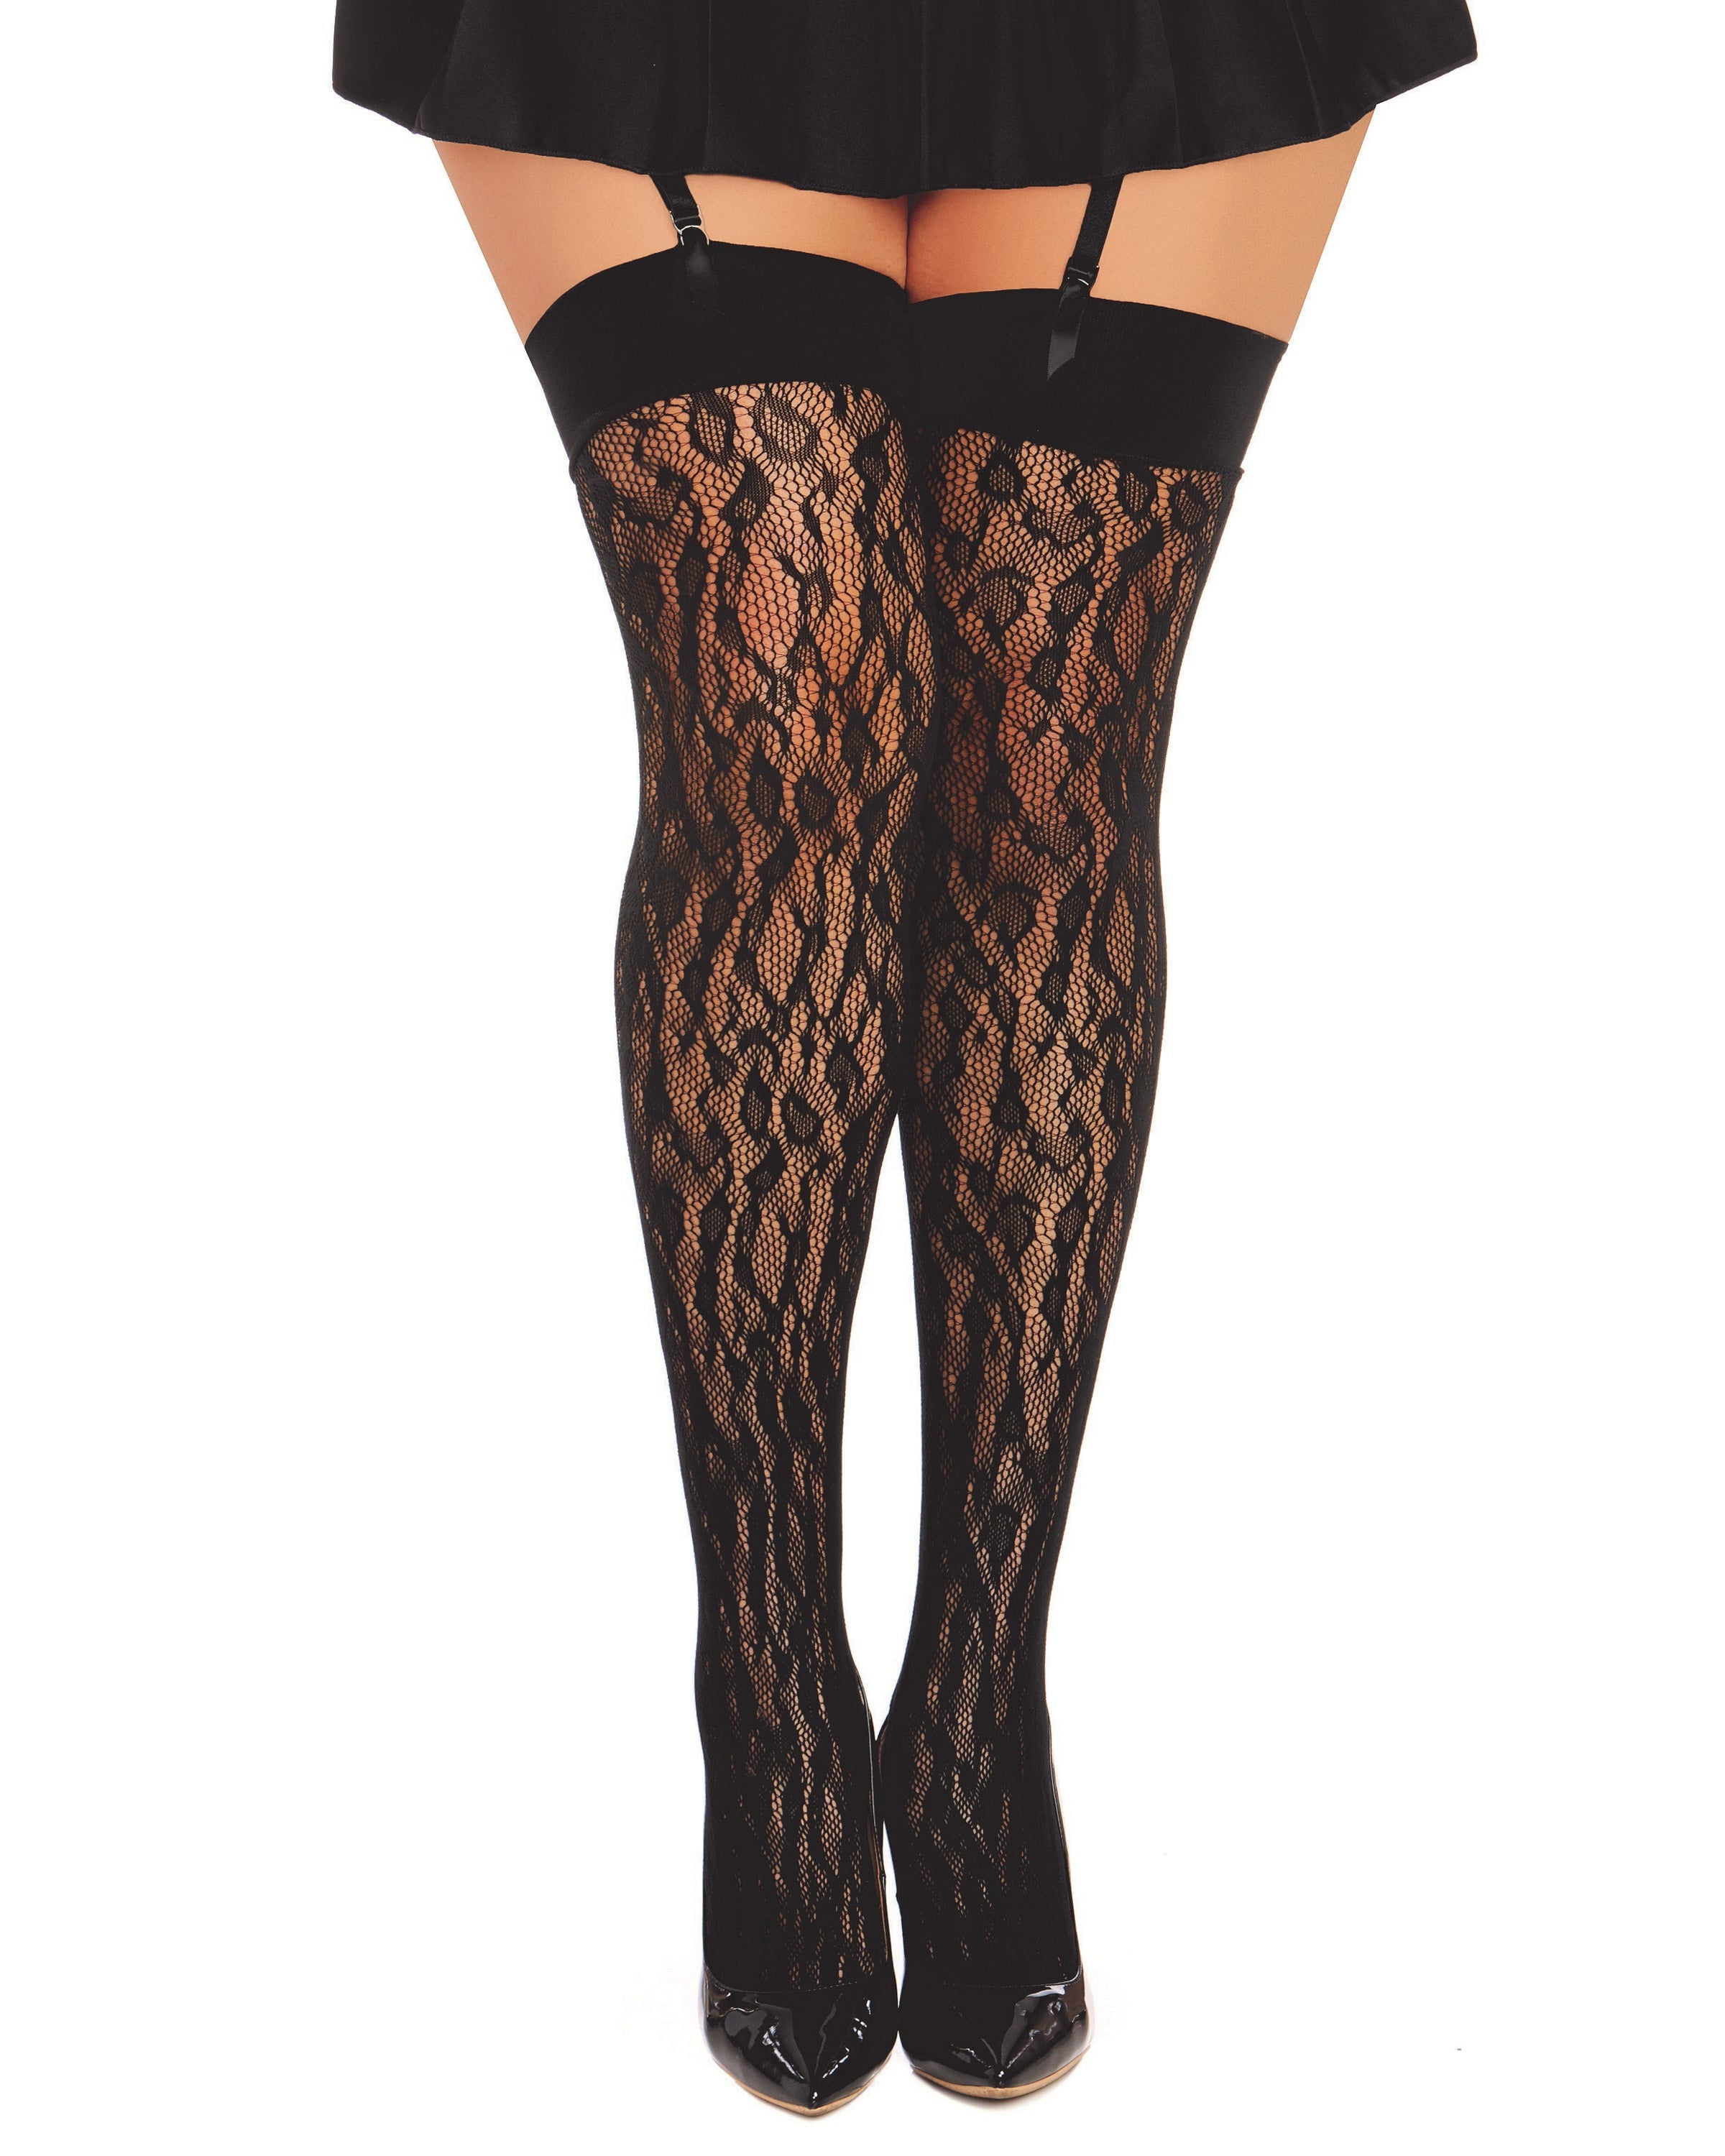 One Size Fits Most Queen Womens Plus Size Neon Diamond Net Thigh High Stockings 